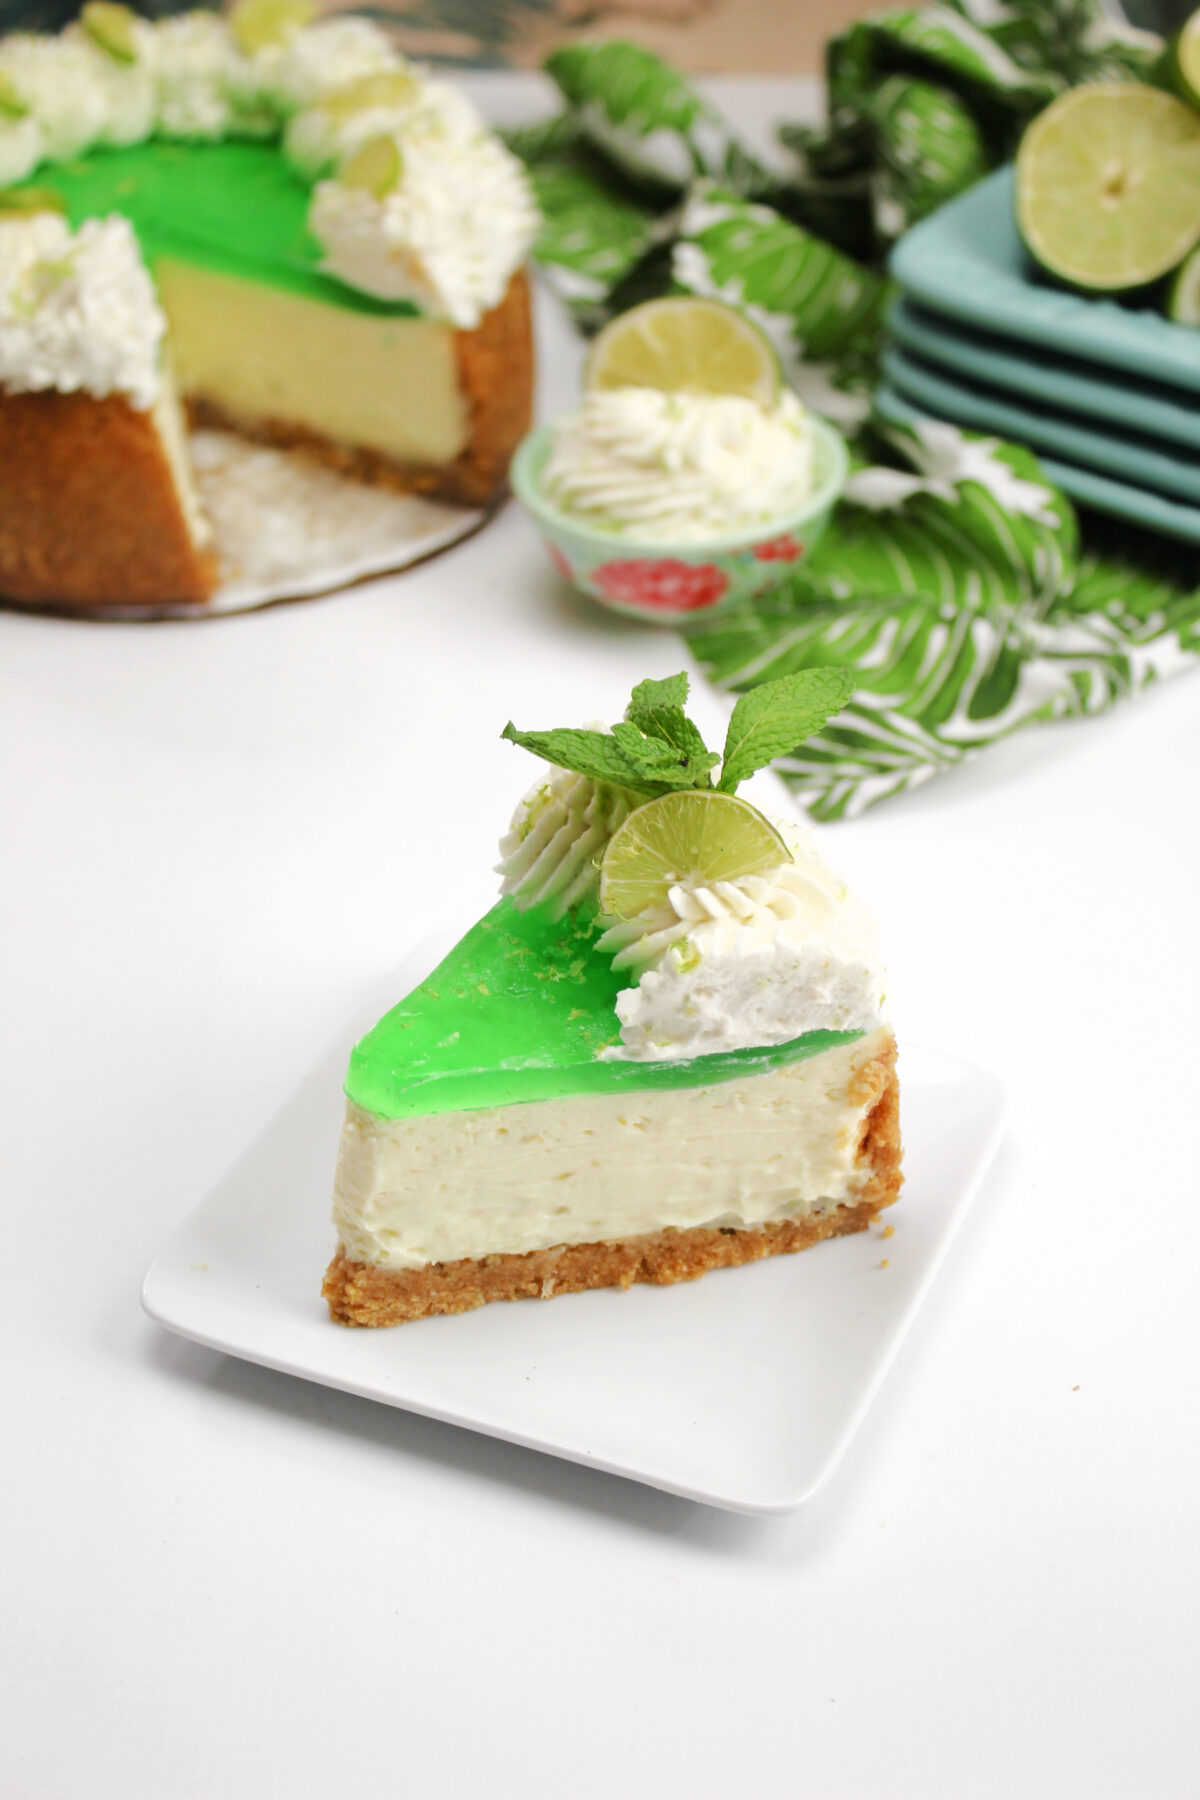 Indulge in our Key Lime Jello Cheesecake recipe, where the zest of Key limes meets creamy cheesecake topped with vibrant lime jello.